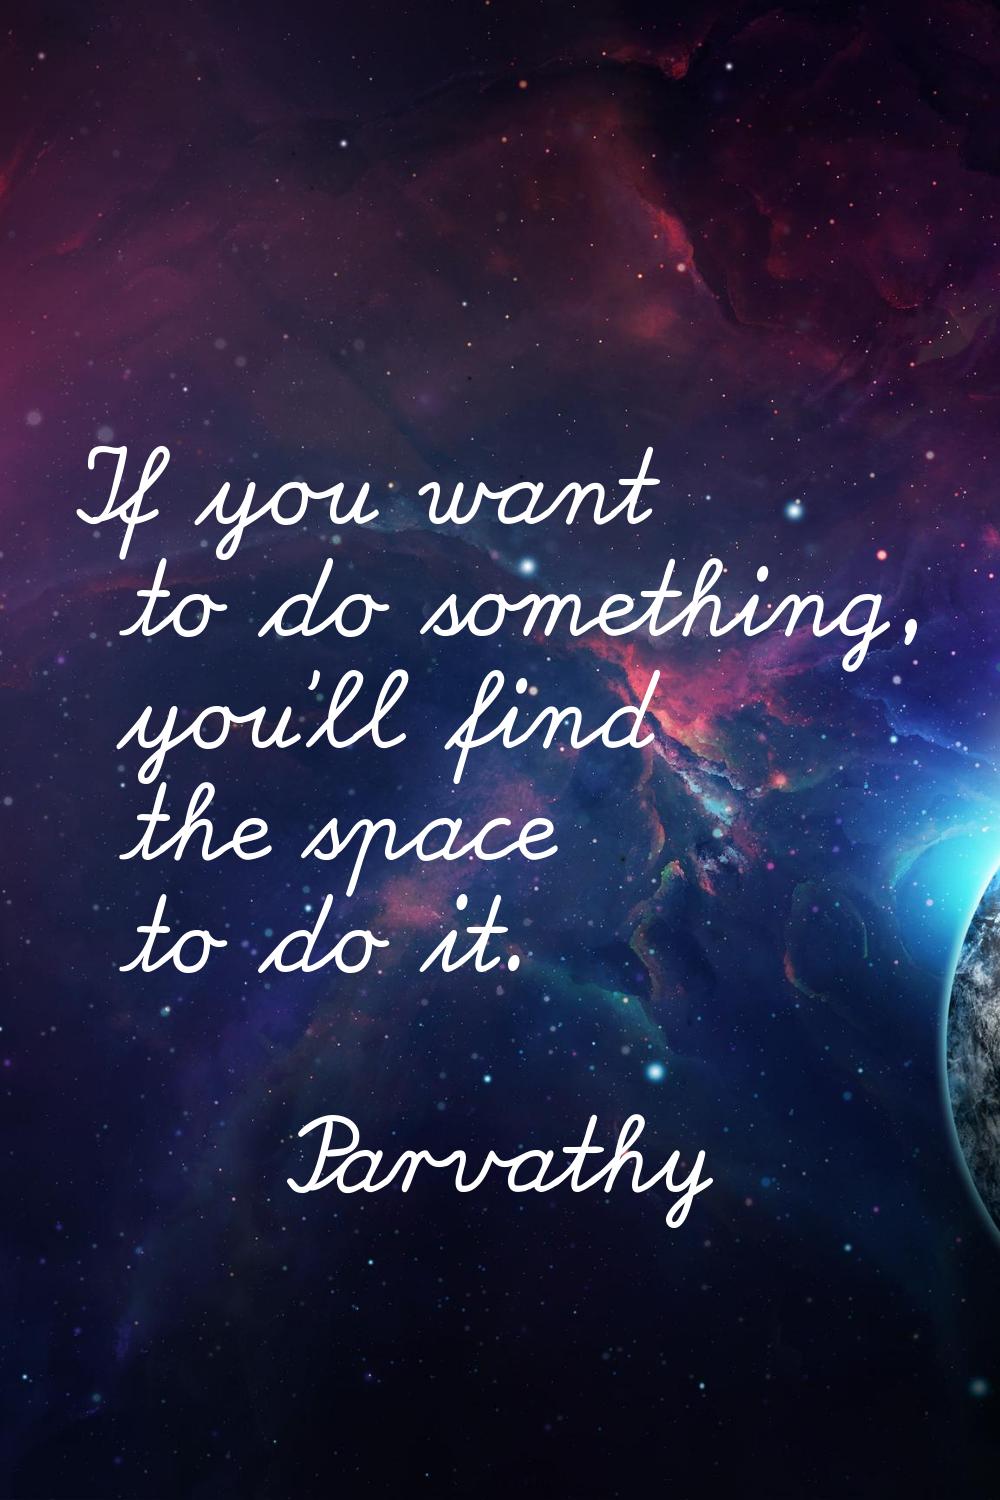 If you want to do something, you'll find the space to do it.